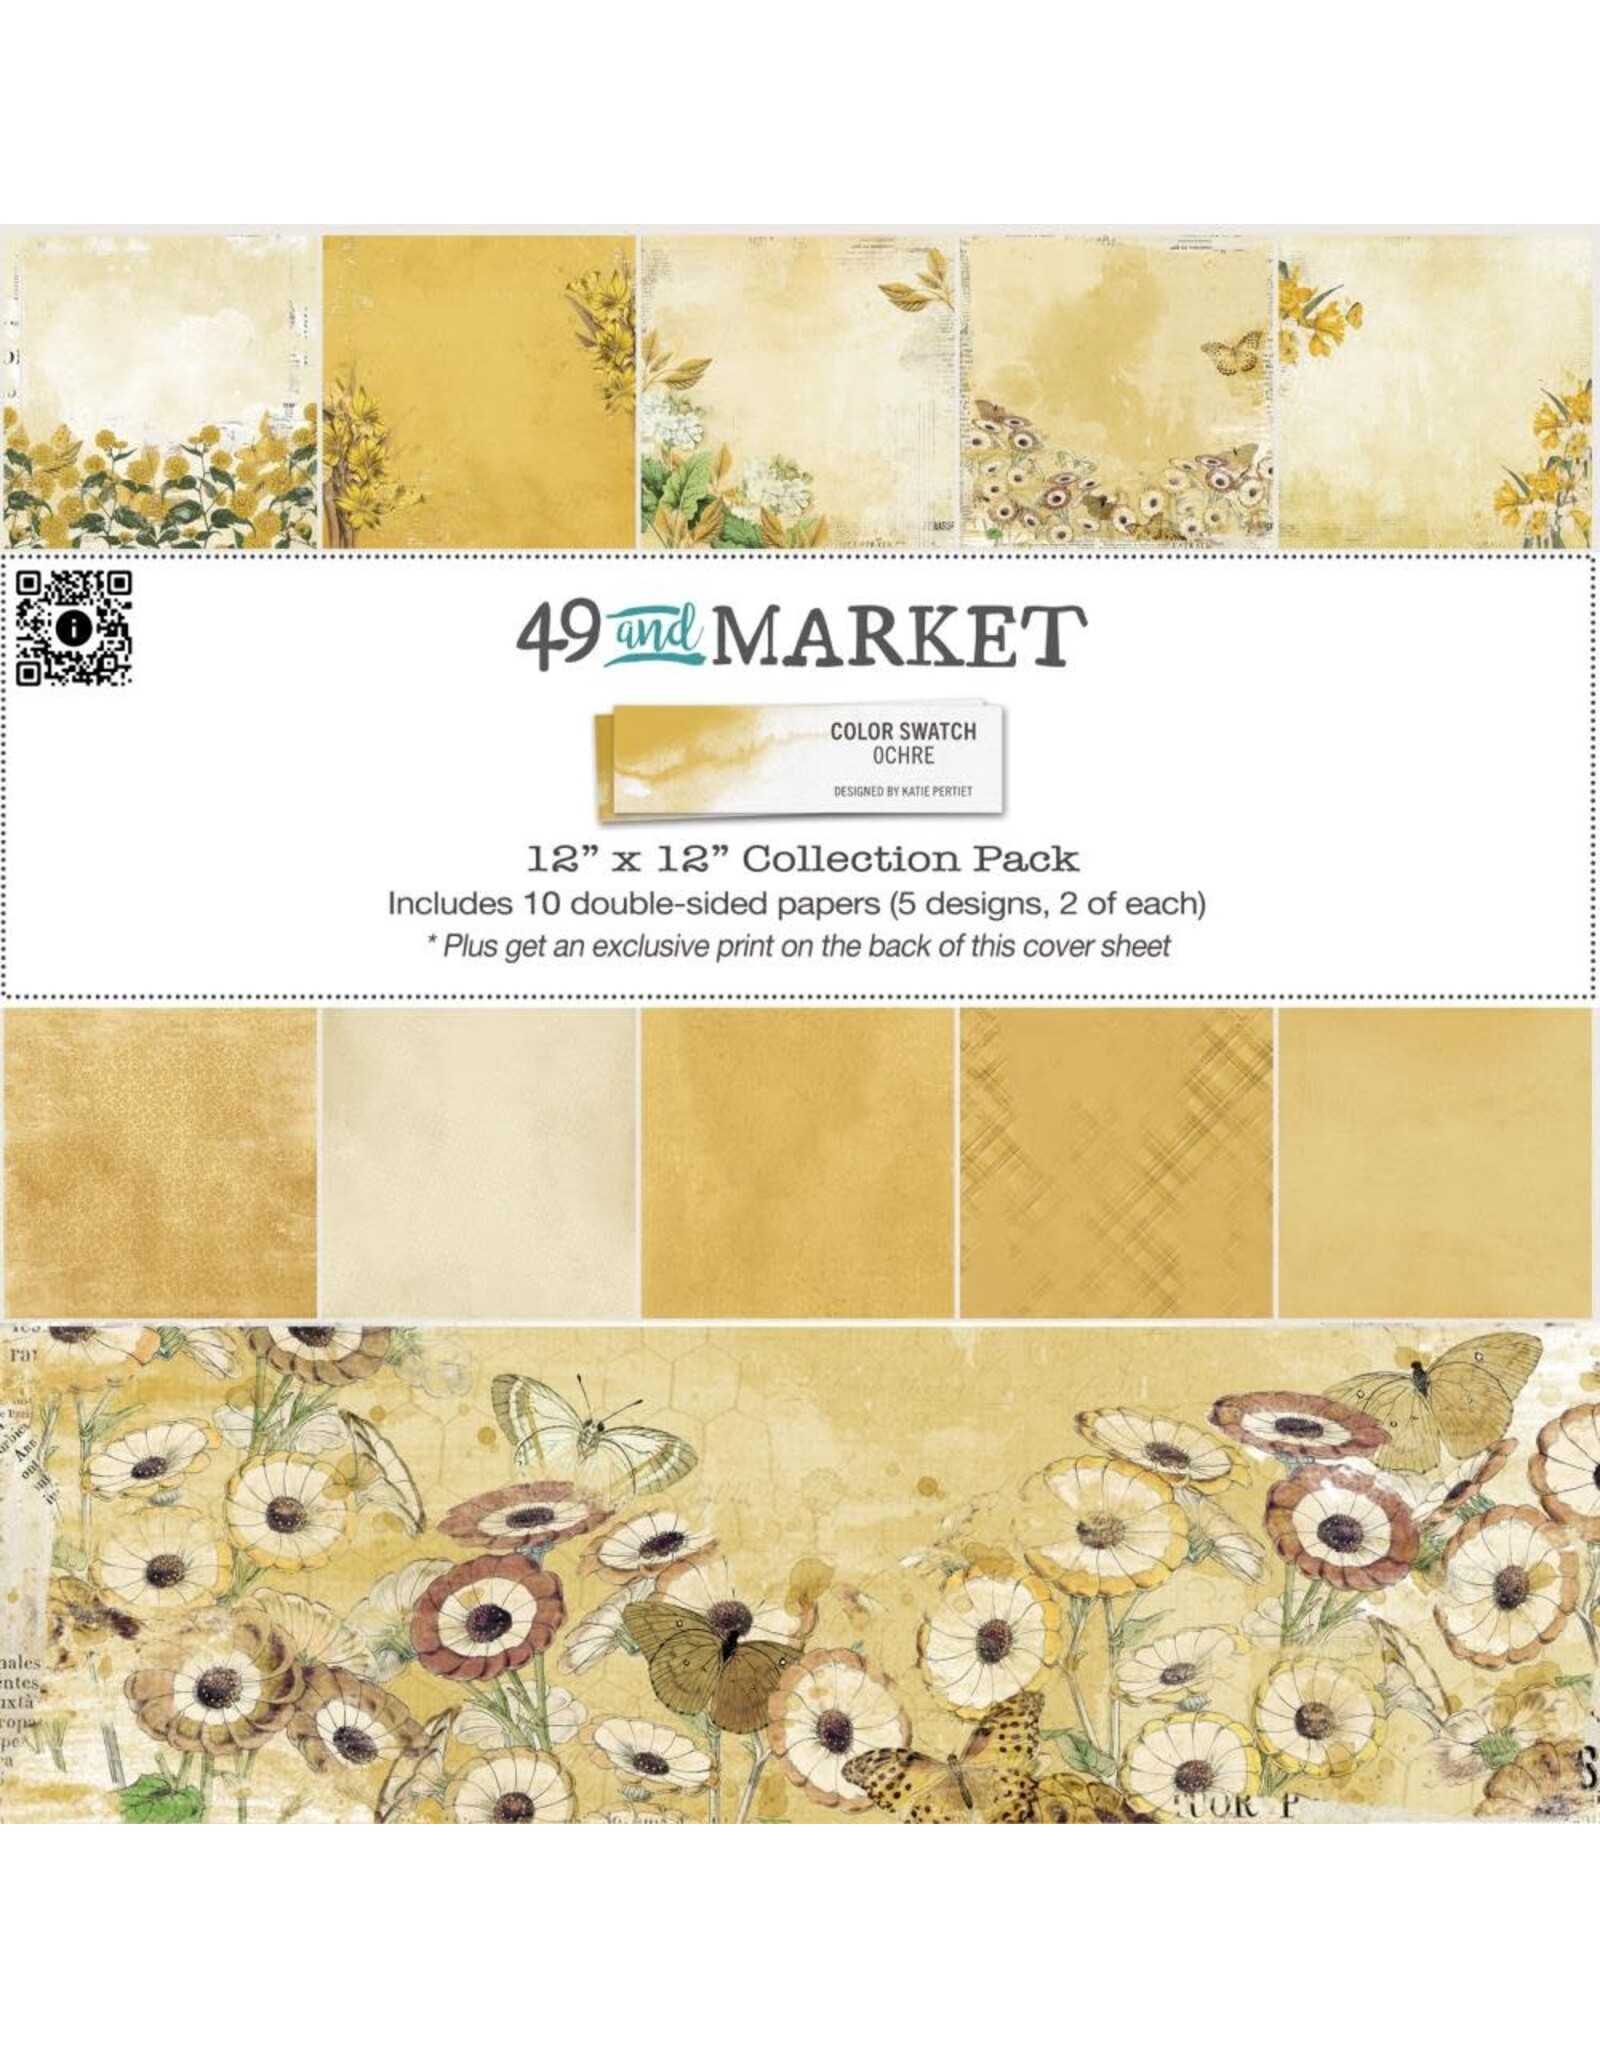 49 AND MARKET Color Swatch: Ochre 12X12 Collection Pack